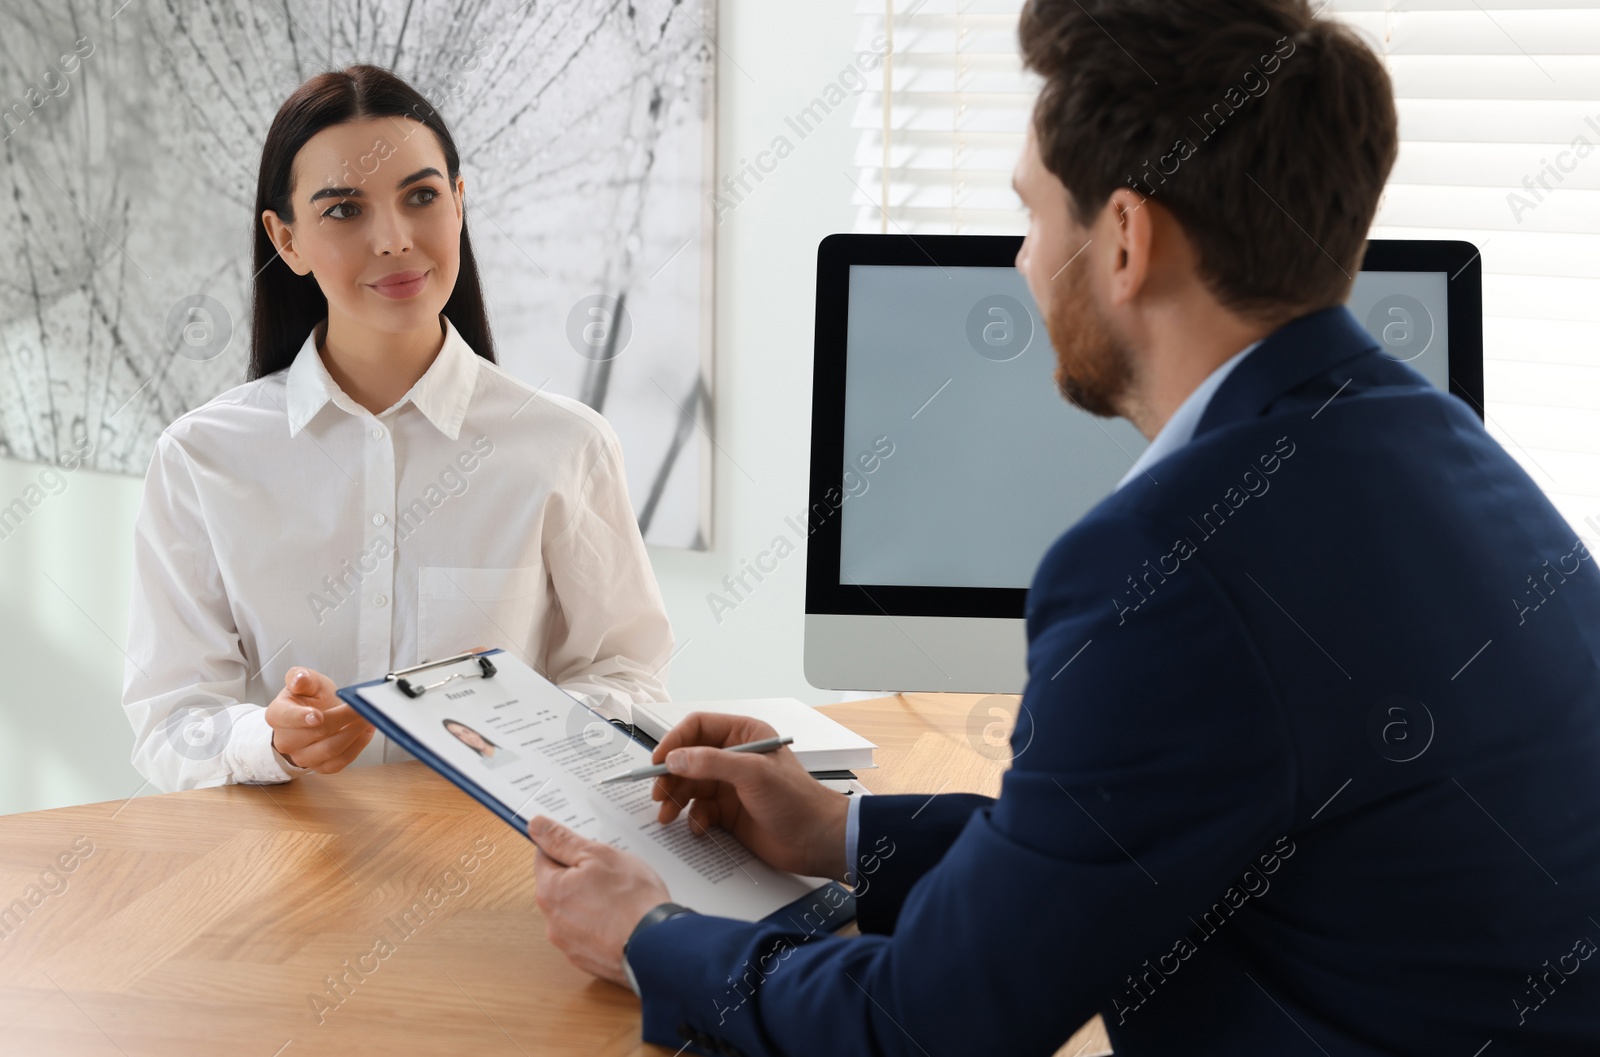 Photo of Human resources manager conducting job interview with applicant in office